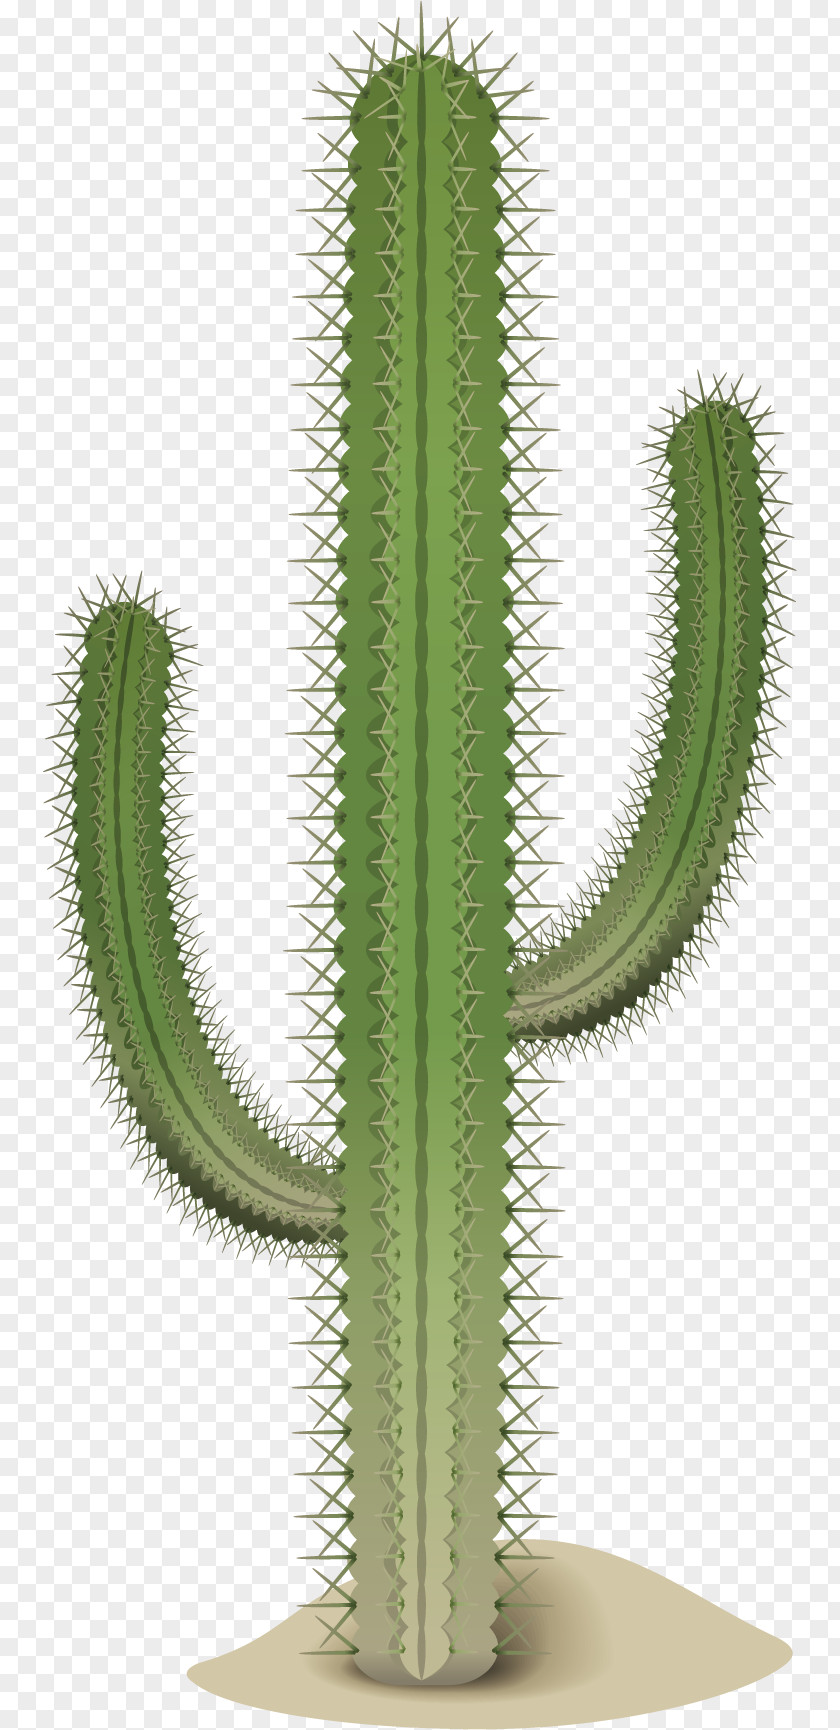 Cactus Vector Material San Pedro Cactaceae Thorns, Spines, And Prickles PNG